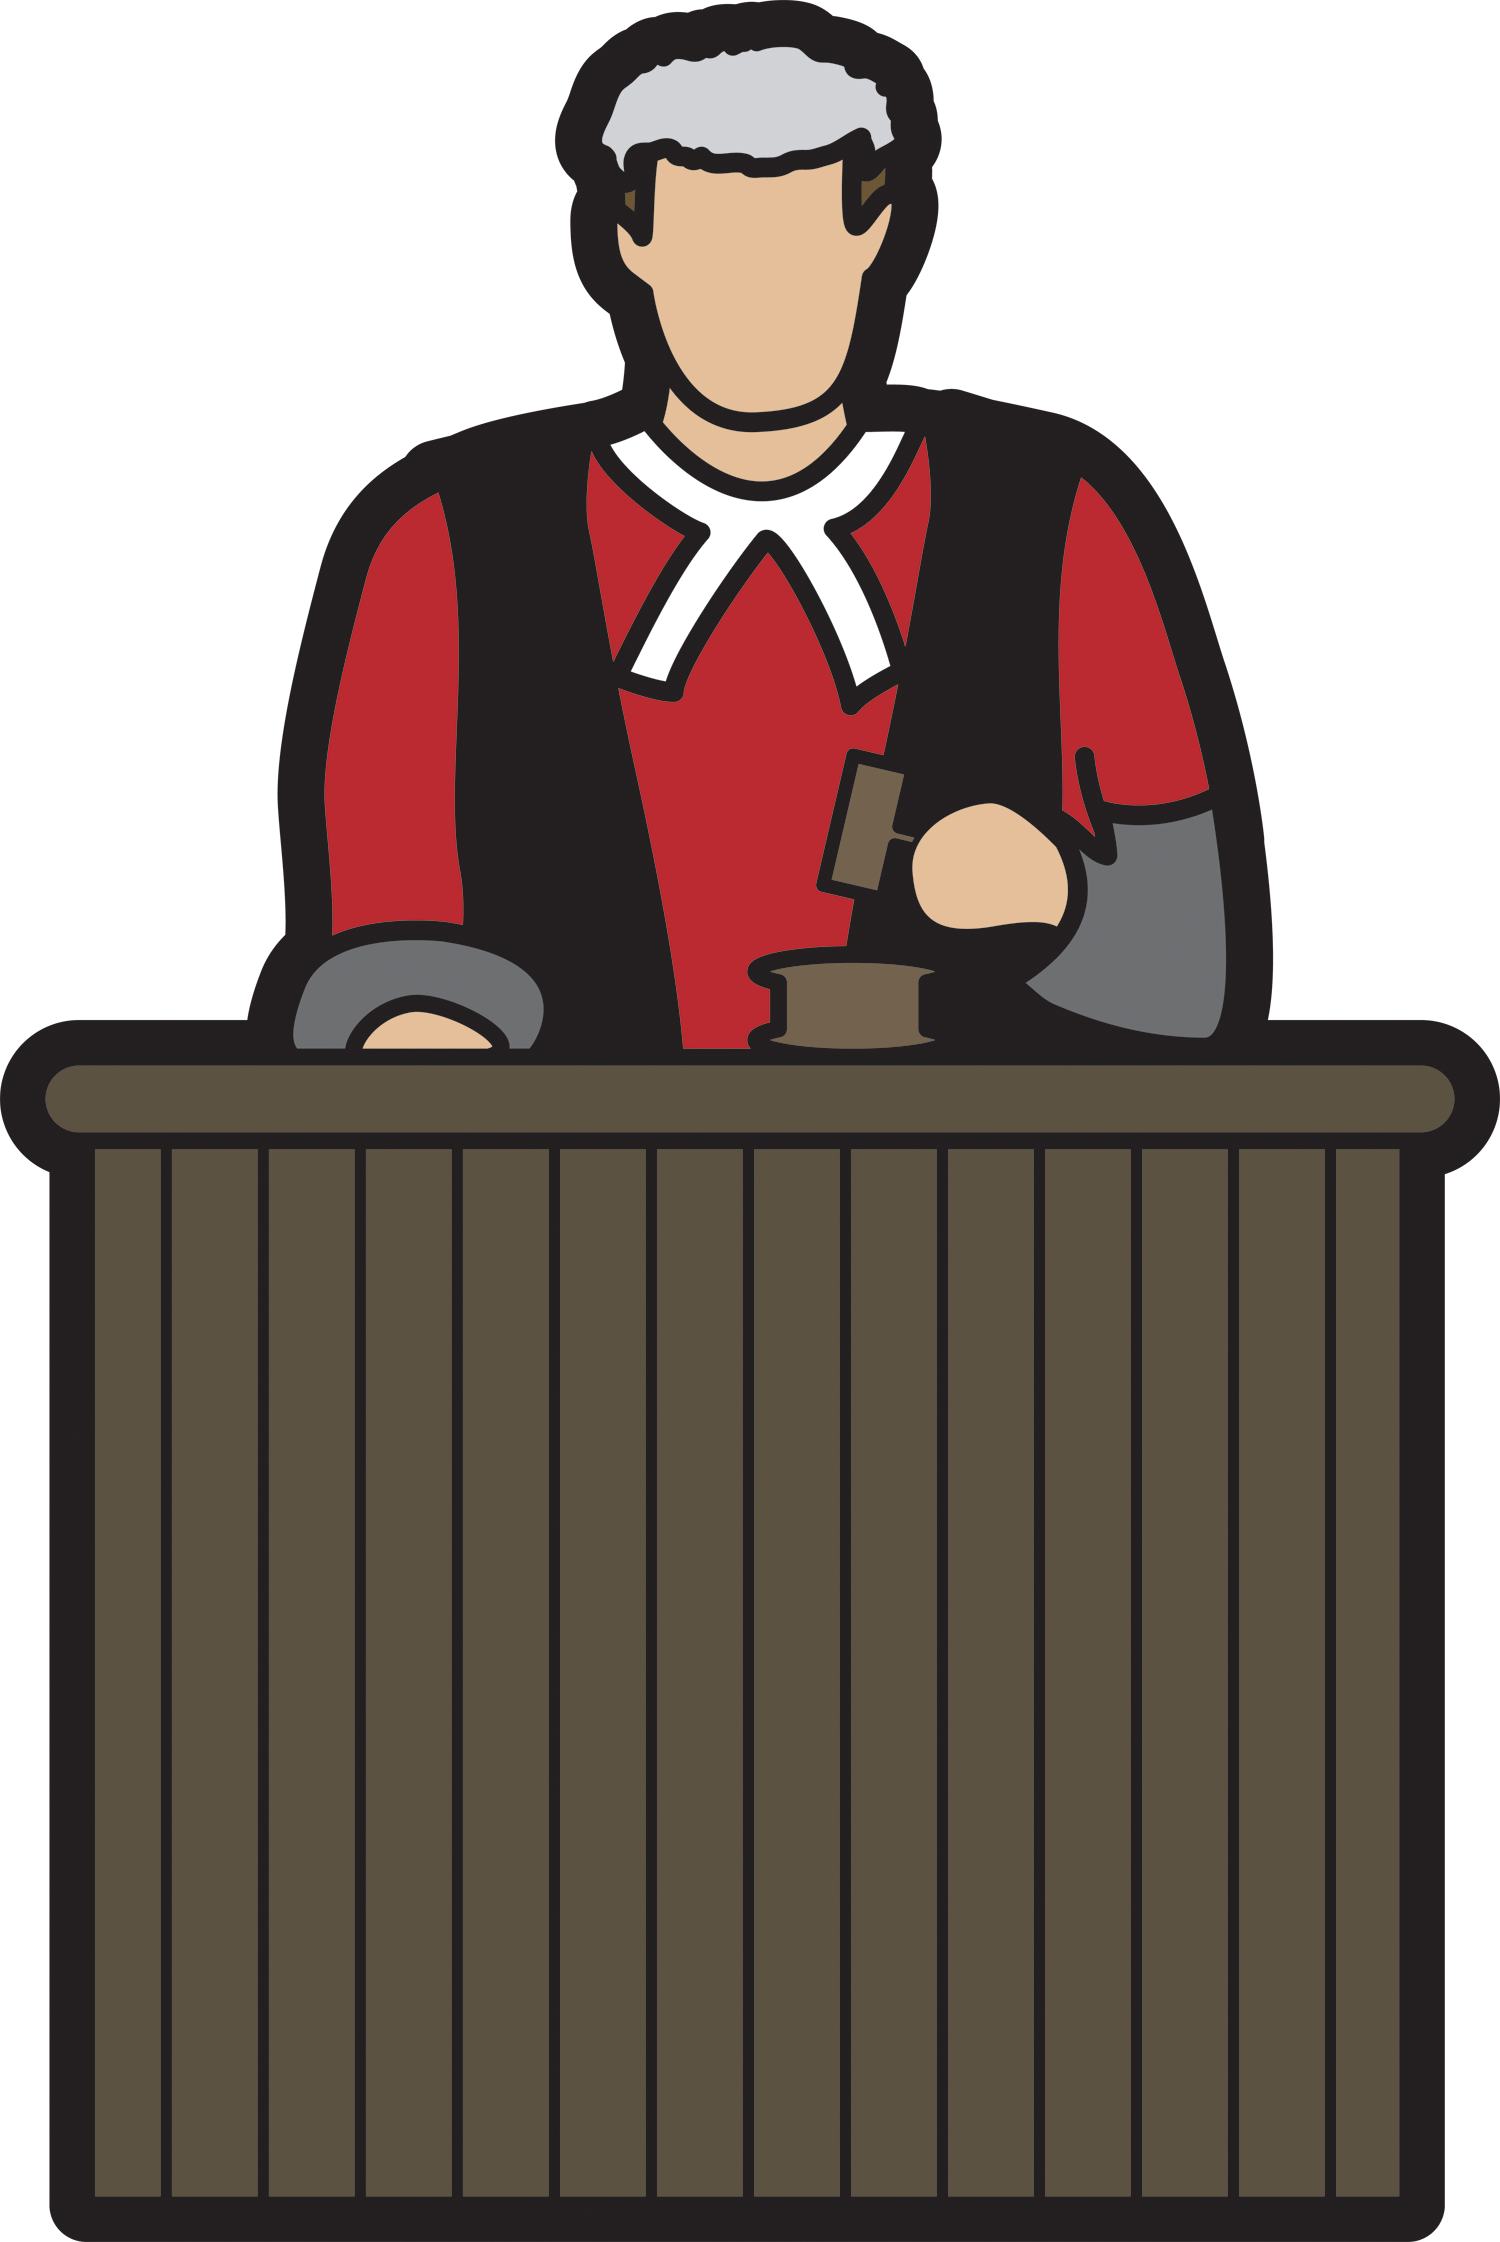 clipart of a judge - photo #28